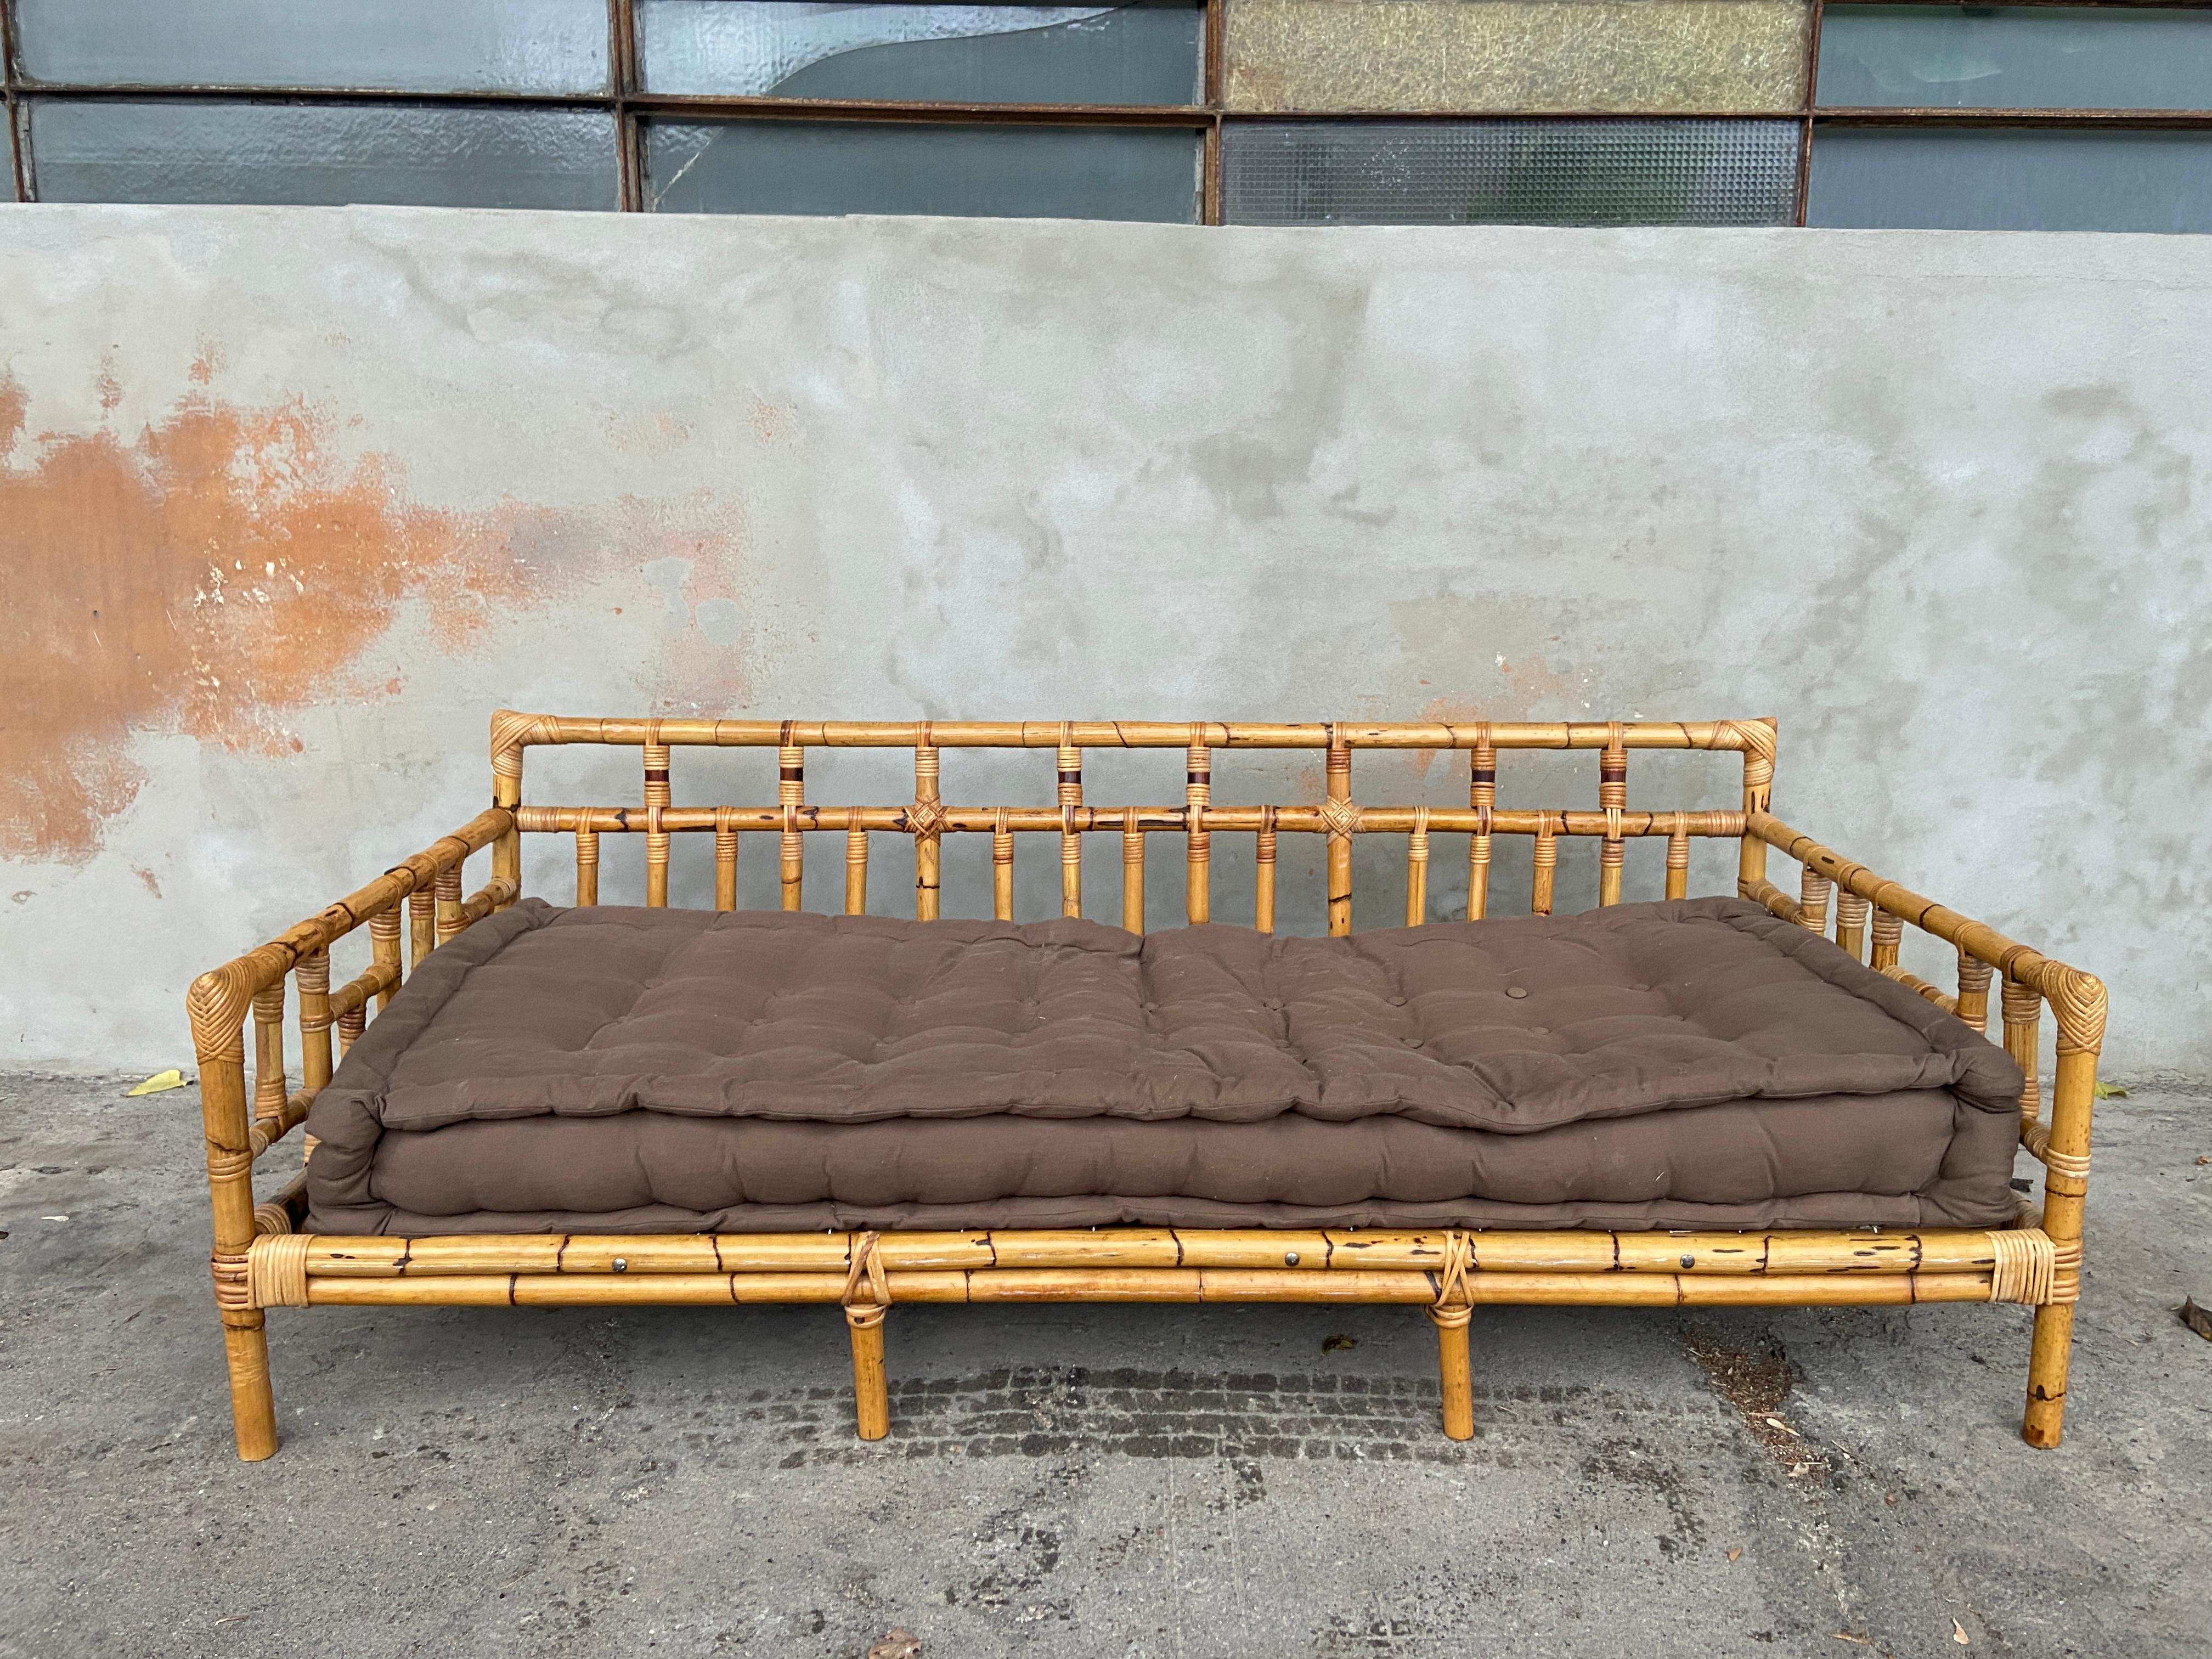 Mid-Century Modern Italian bamboo and rattan sofa bed with its original quilted Cushion by Vivai del Sud.
The sofa comes with its own bed net and could be used as an Italian standard single bed and needs a mattress which measures cm.190x80
The